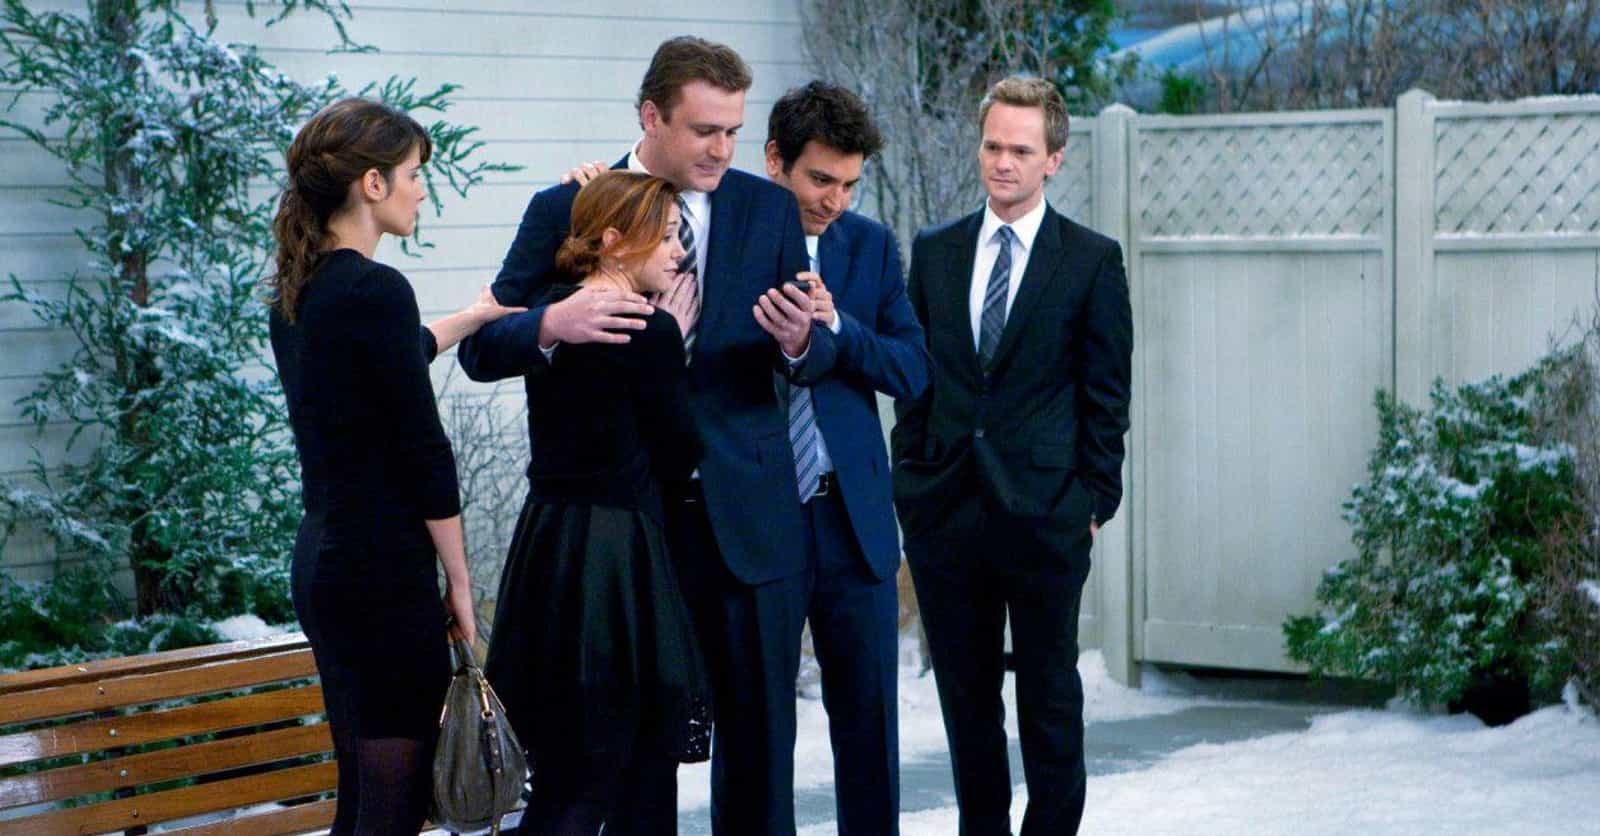 Marshall Eriksen’s Most Important Moments On ‘How I Met Your Mother’